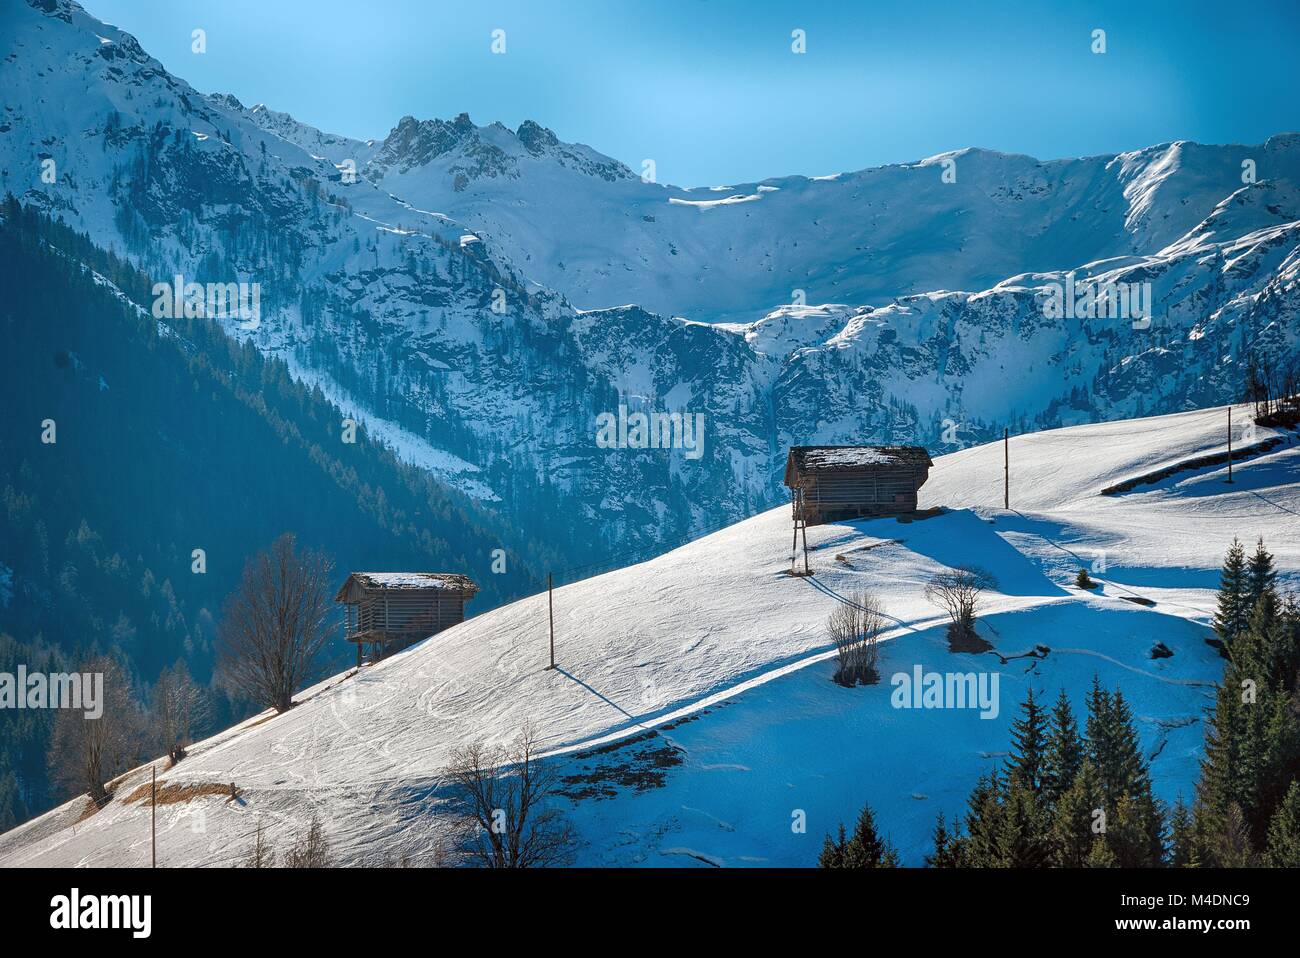 winter scenery in the mountains with wooden hay huts Stock Photo